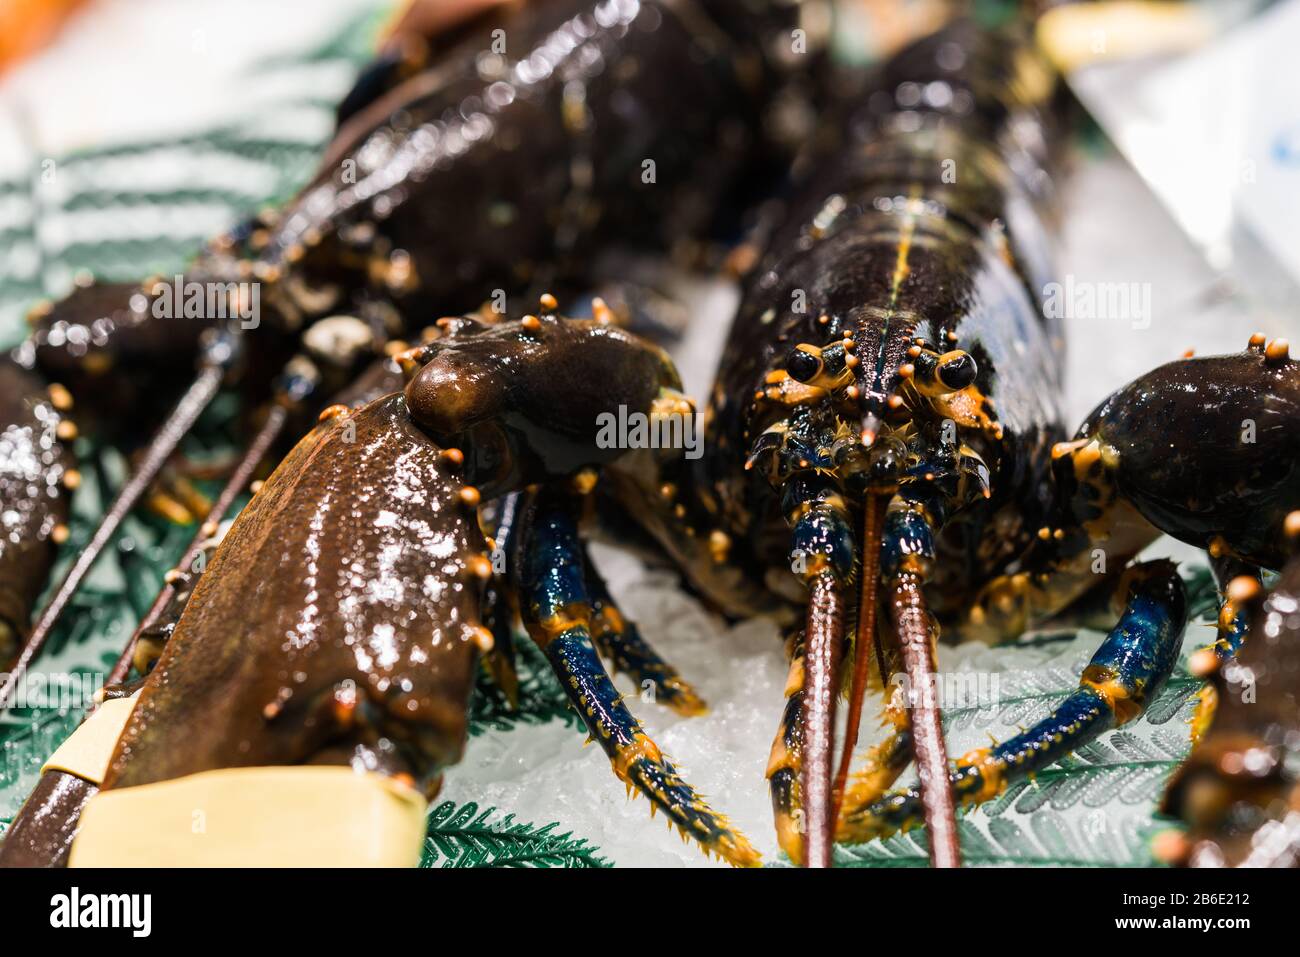 Close up food photo of a raw seafood lobster at the farmers market stall. Stock Photo